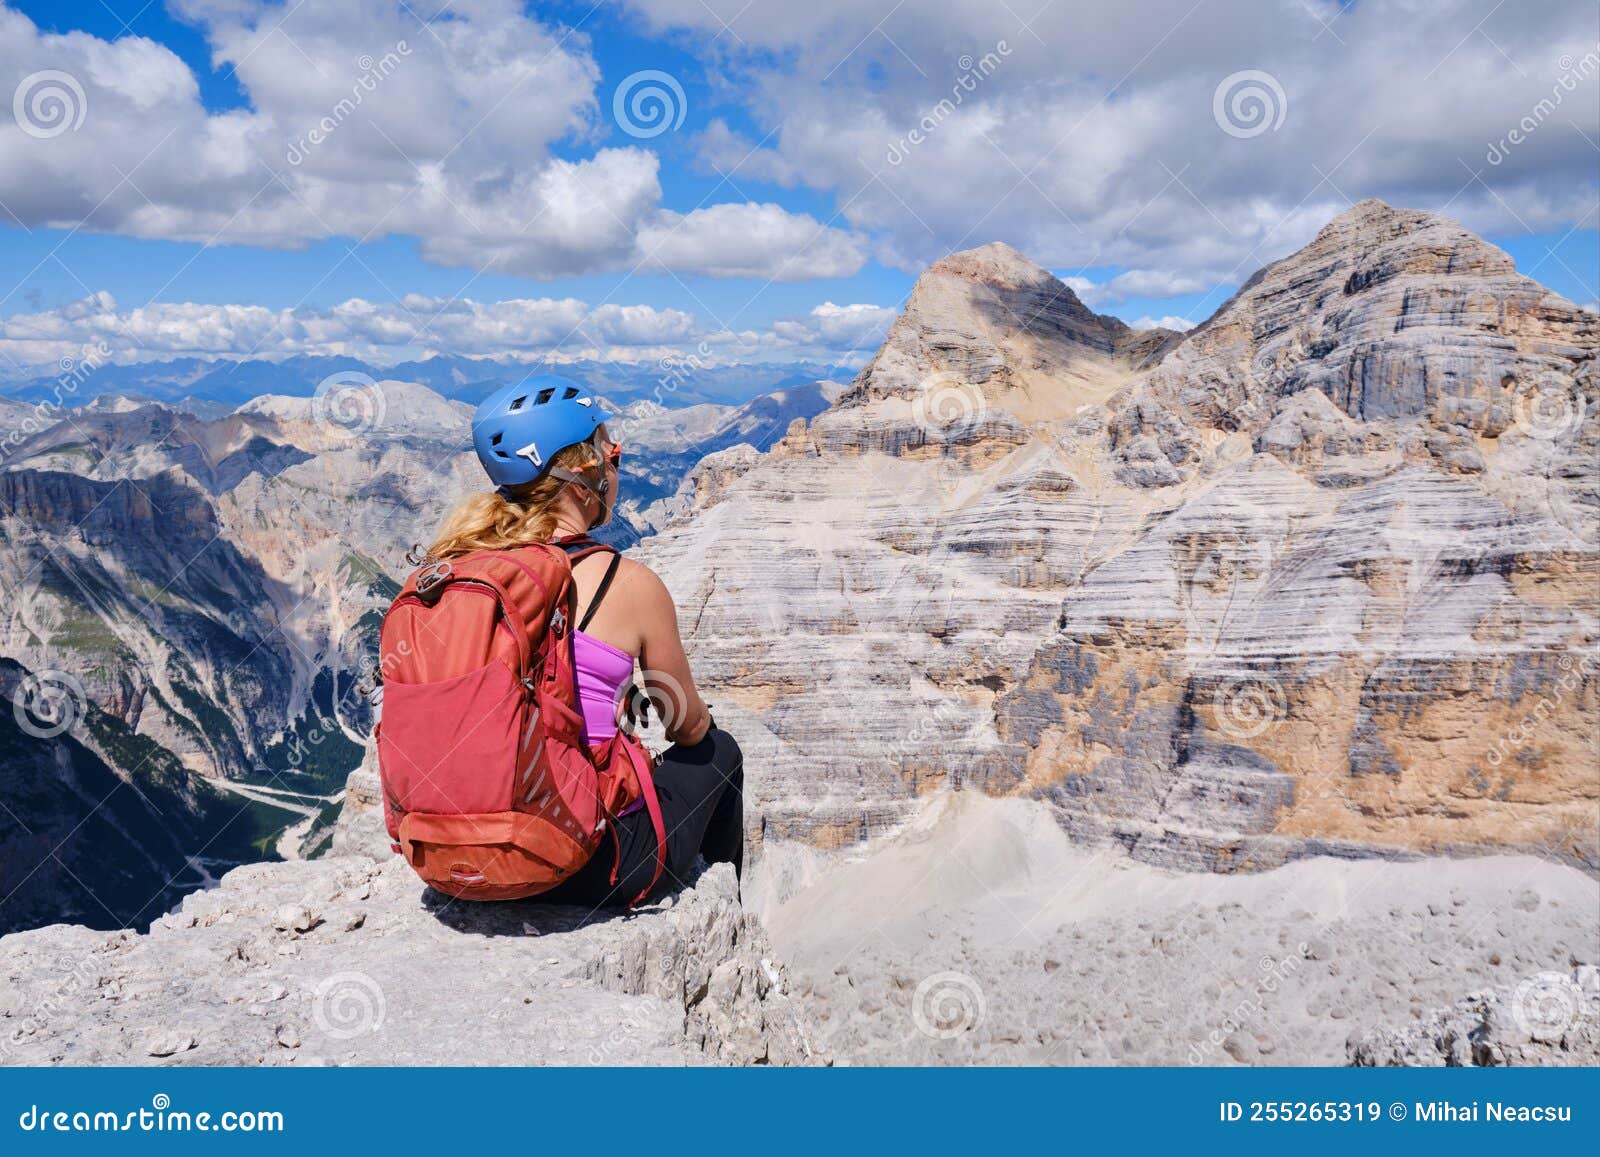 woman hiker with helmet and red backpack looks towards tofana di mezzo and di dentro in dolomites mountains, italy.